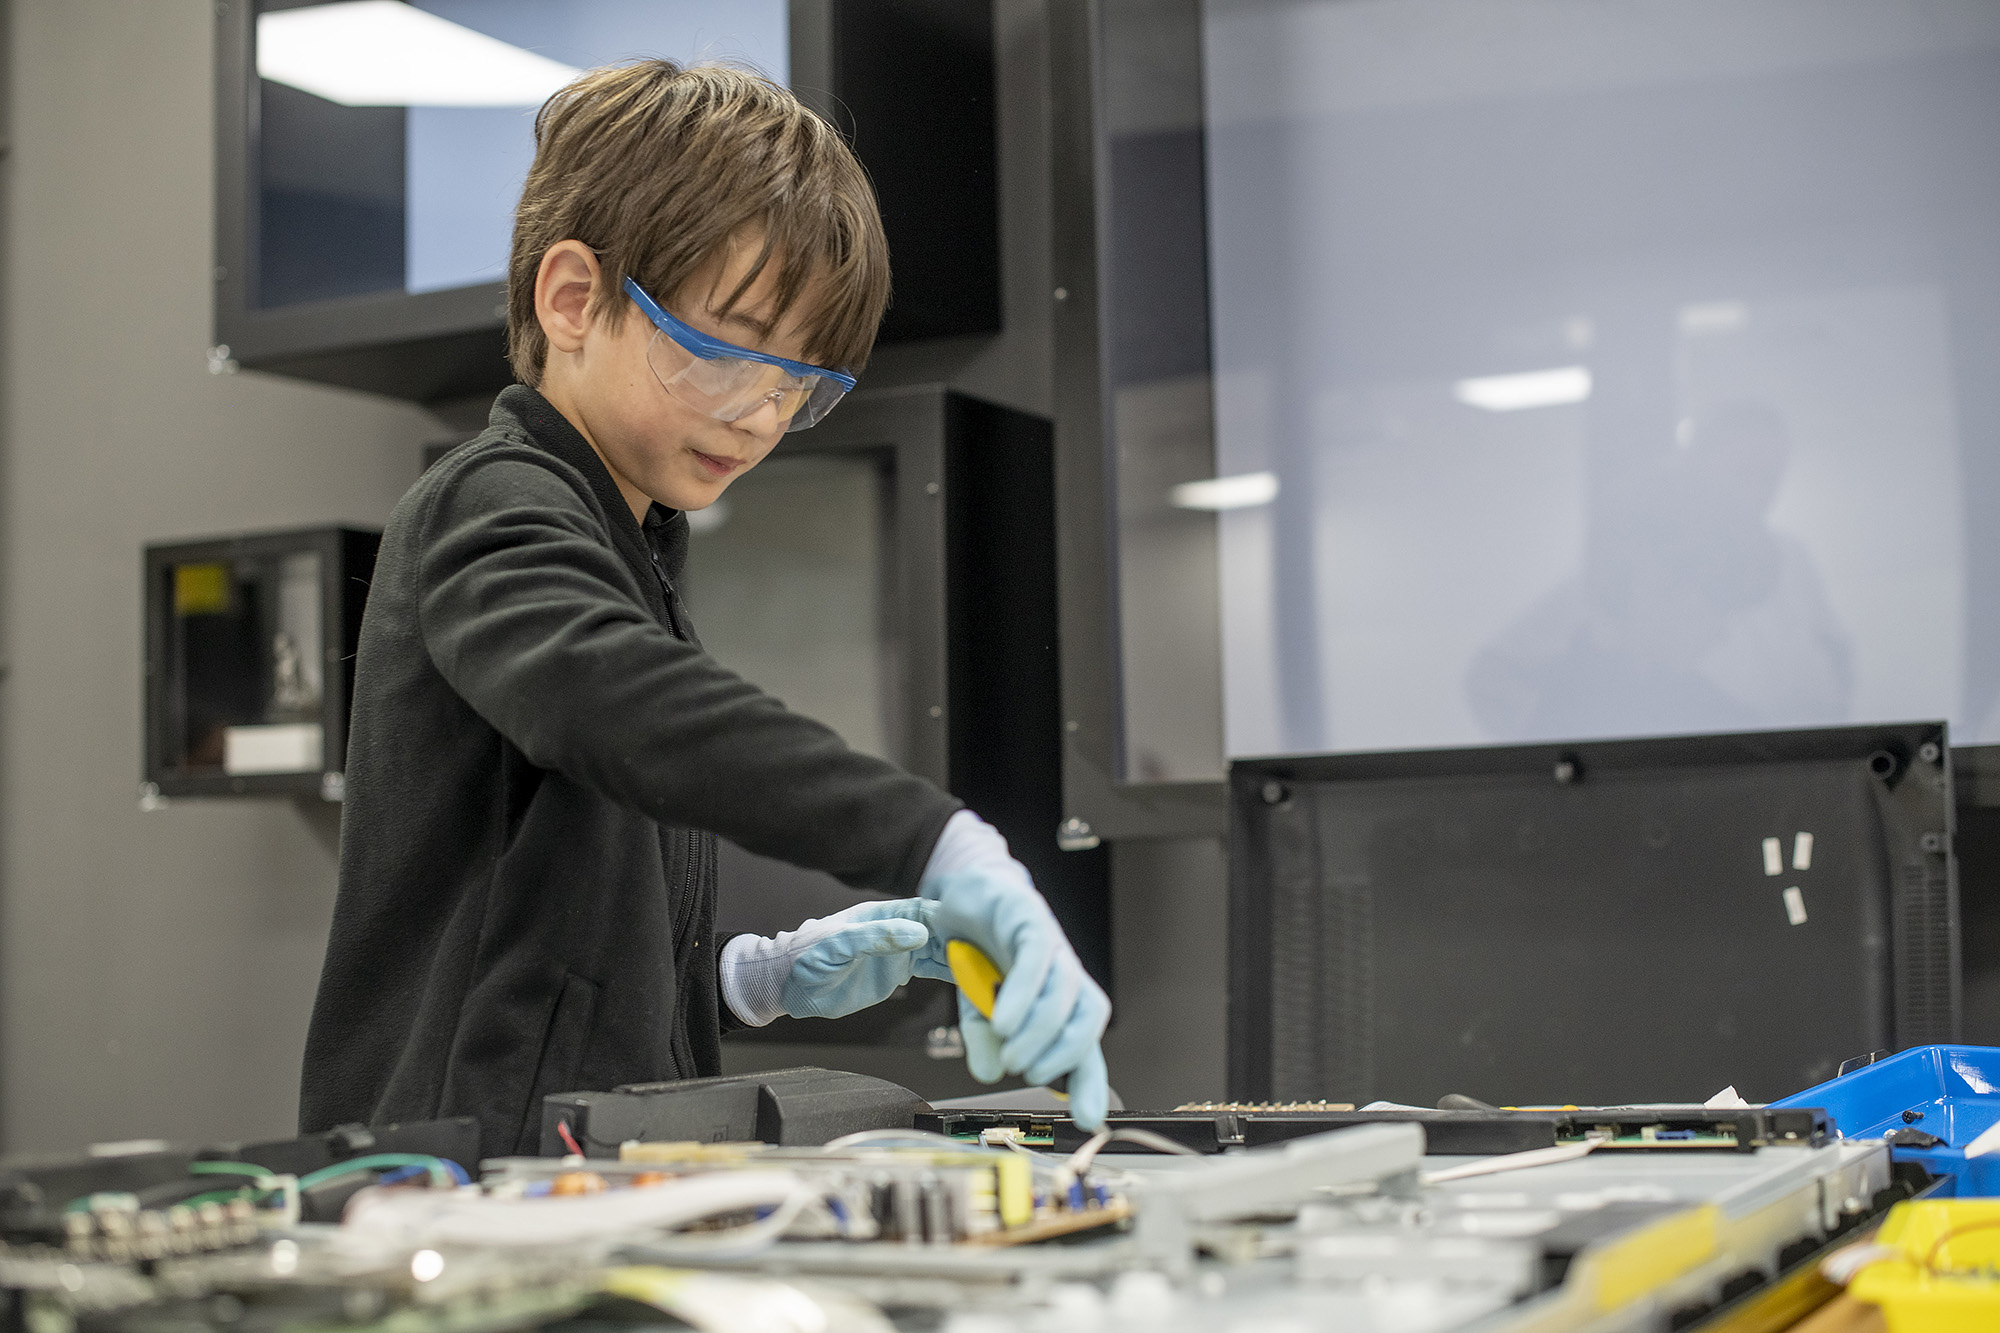 A boy wearing safety goggles and gloves is using tools to take apart an appliance on a worktop